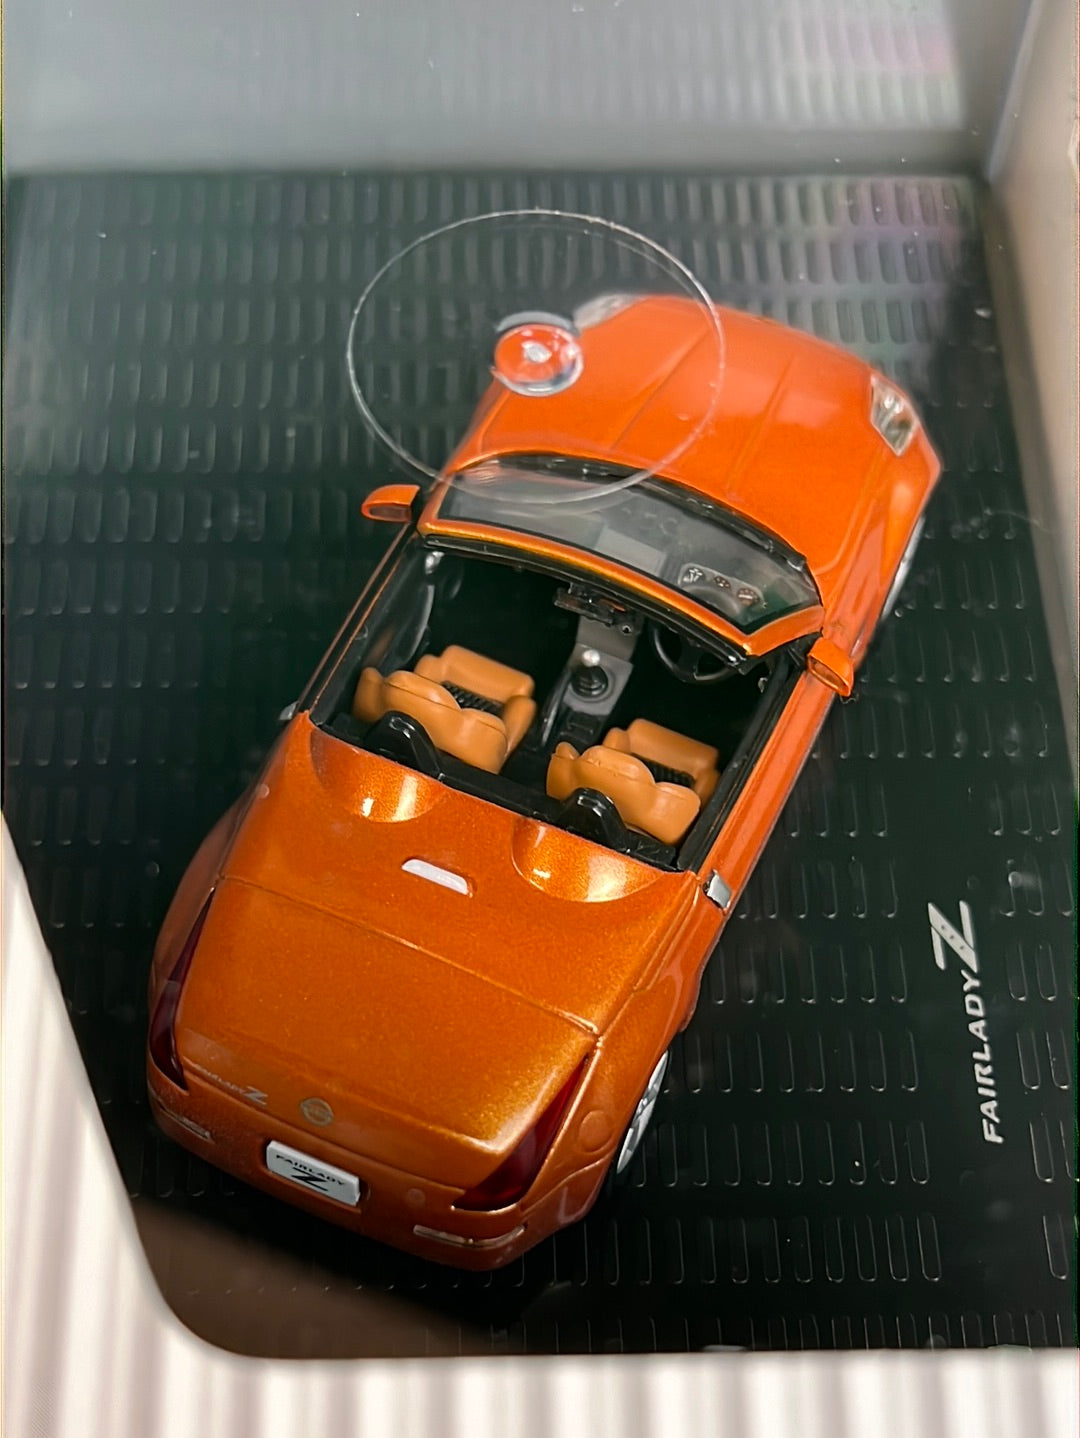 NISSAN Official - KYOSHO Produced: Nissan Z33 Fairlady Z Convertible - 1/43 Scale Diecast